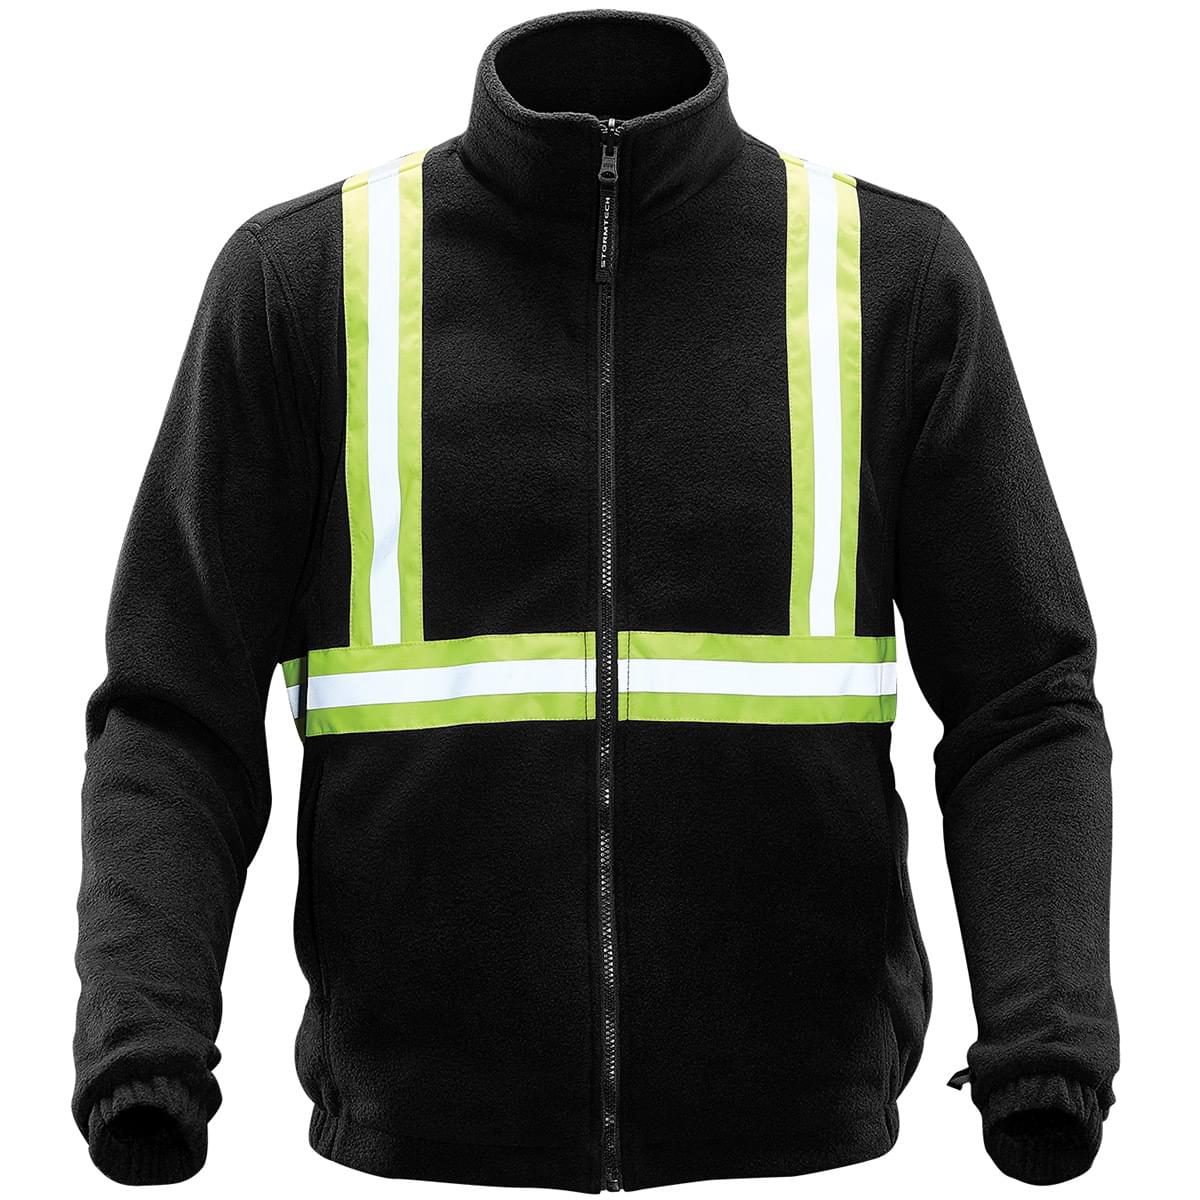 Stormtech Unisex HD 3-In-1 Reflective Parka #TPX-3R Black Liner Front